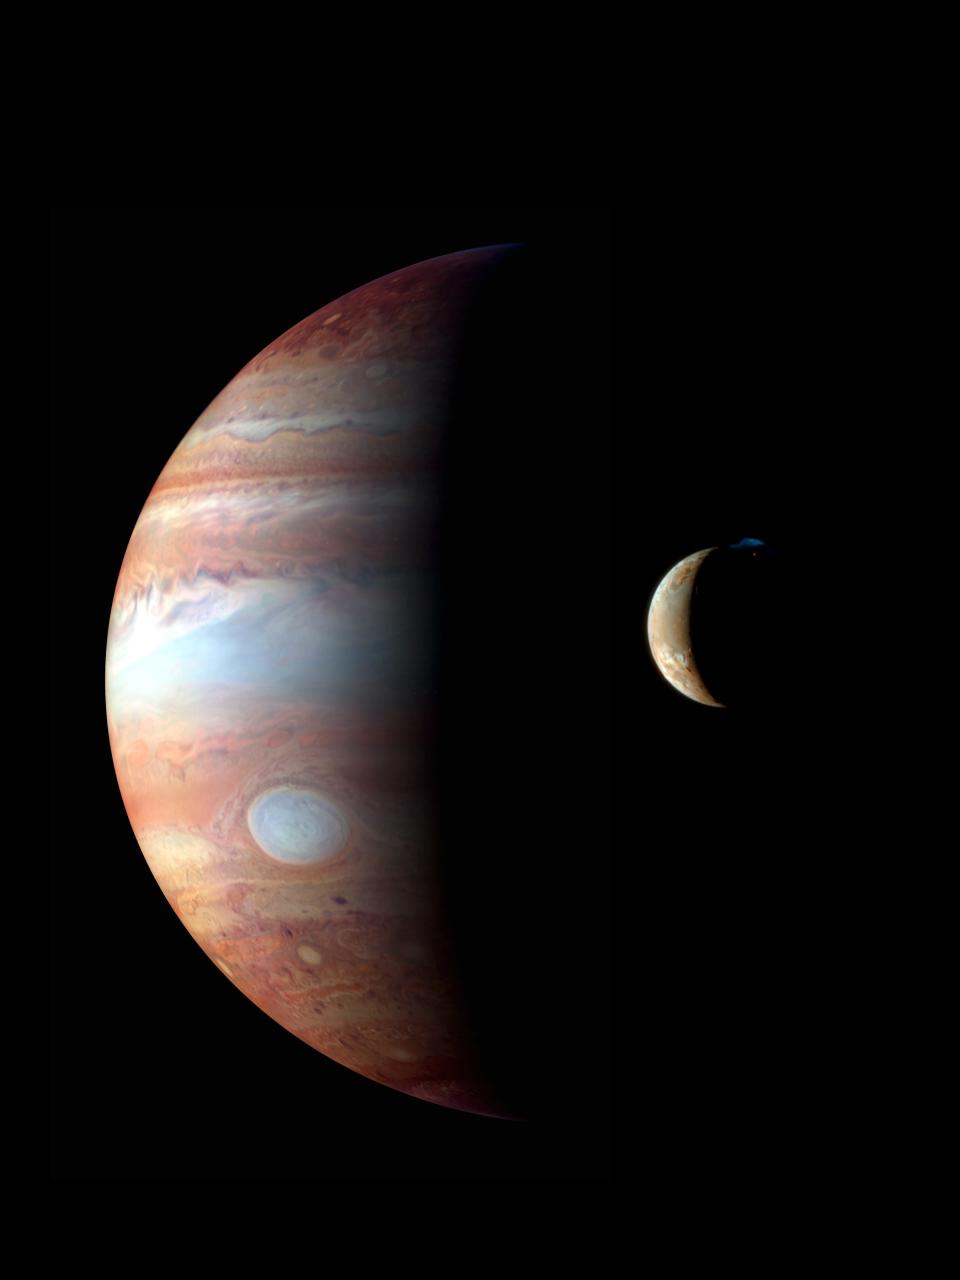 This is a montage of New Horizons images of Jupiter and its volcanic moon Io, taken during the spacecraft’s Jupiter flyby in early 2007.